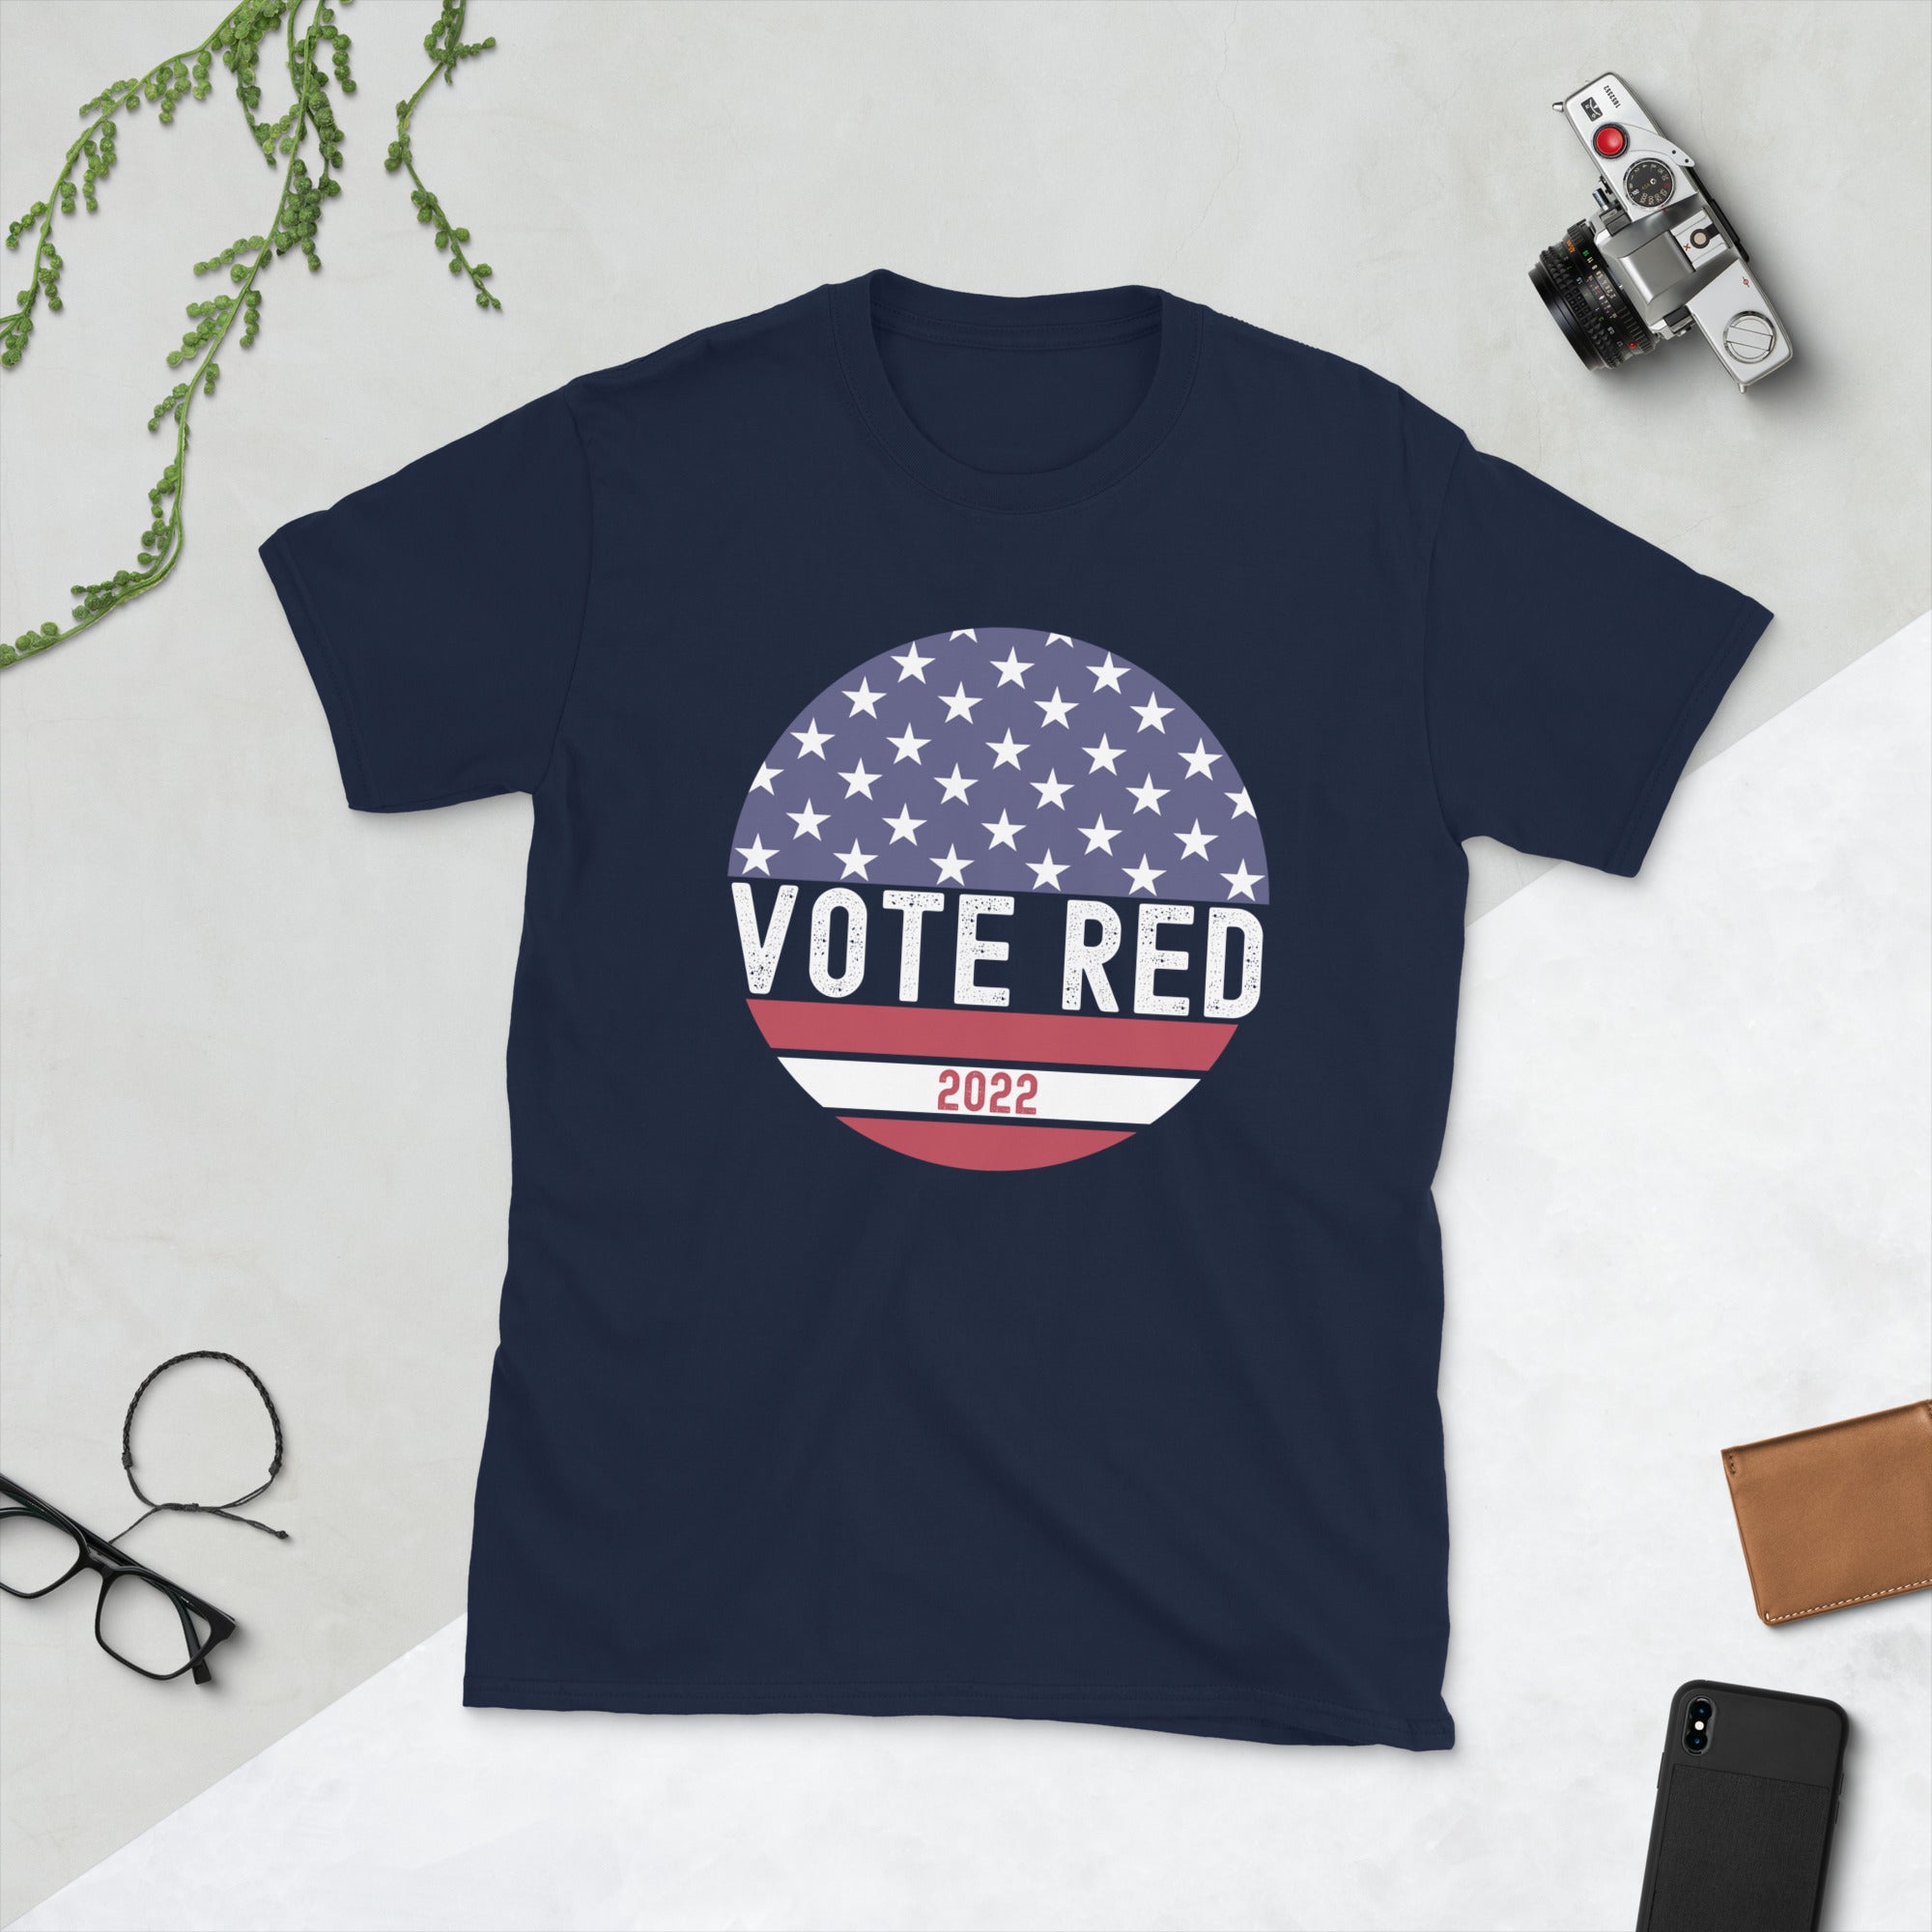 Vote Red 2022 Shirt, Republican Shirt, Midterm Election 2022, FJB Tshirt, Patriotic Shirt, Red Wave 22, Ultra MAGA Tee, Conservative Gifts - Madeinsea©